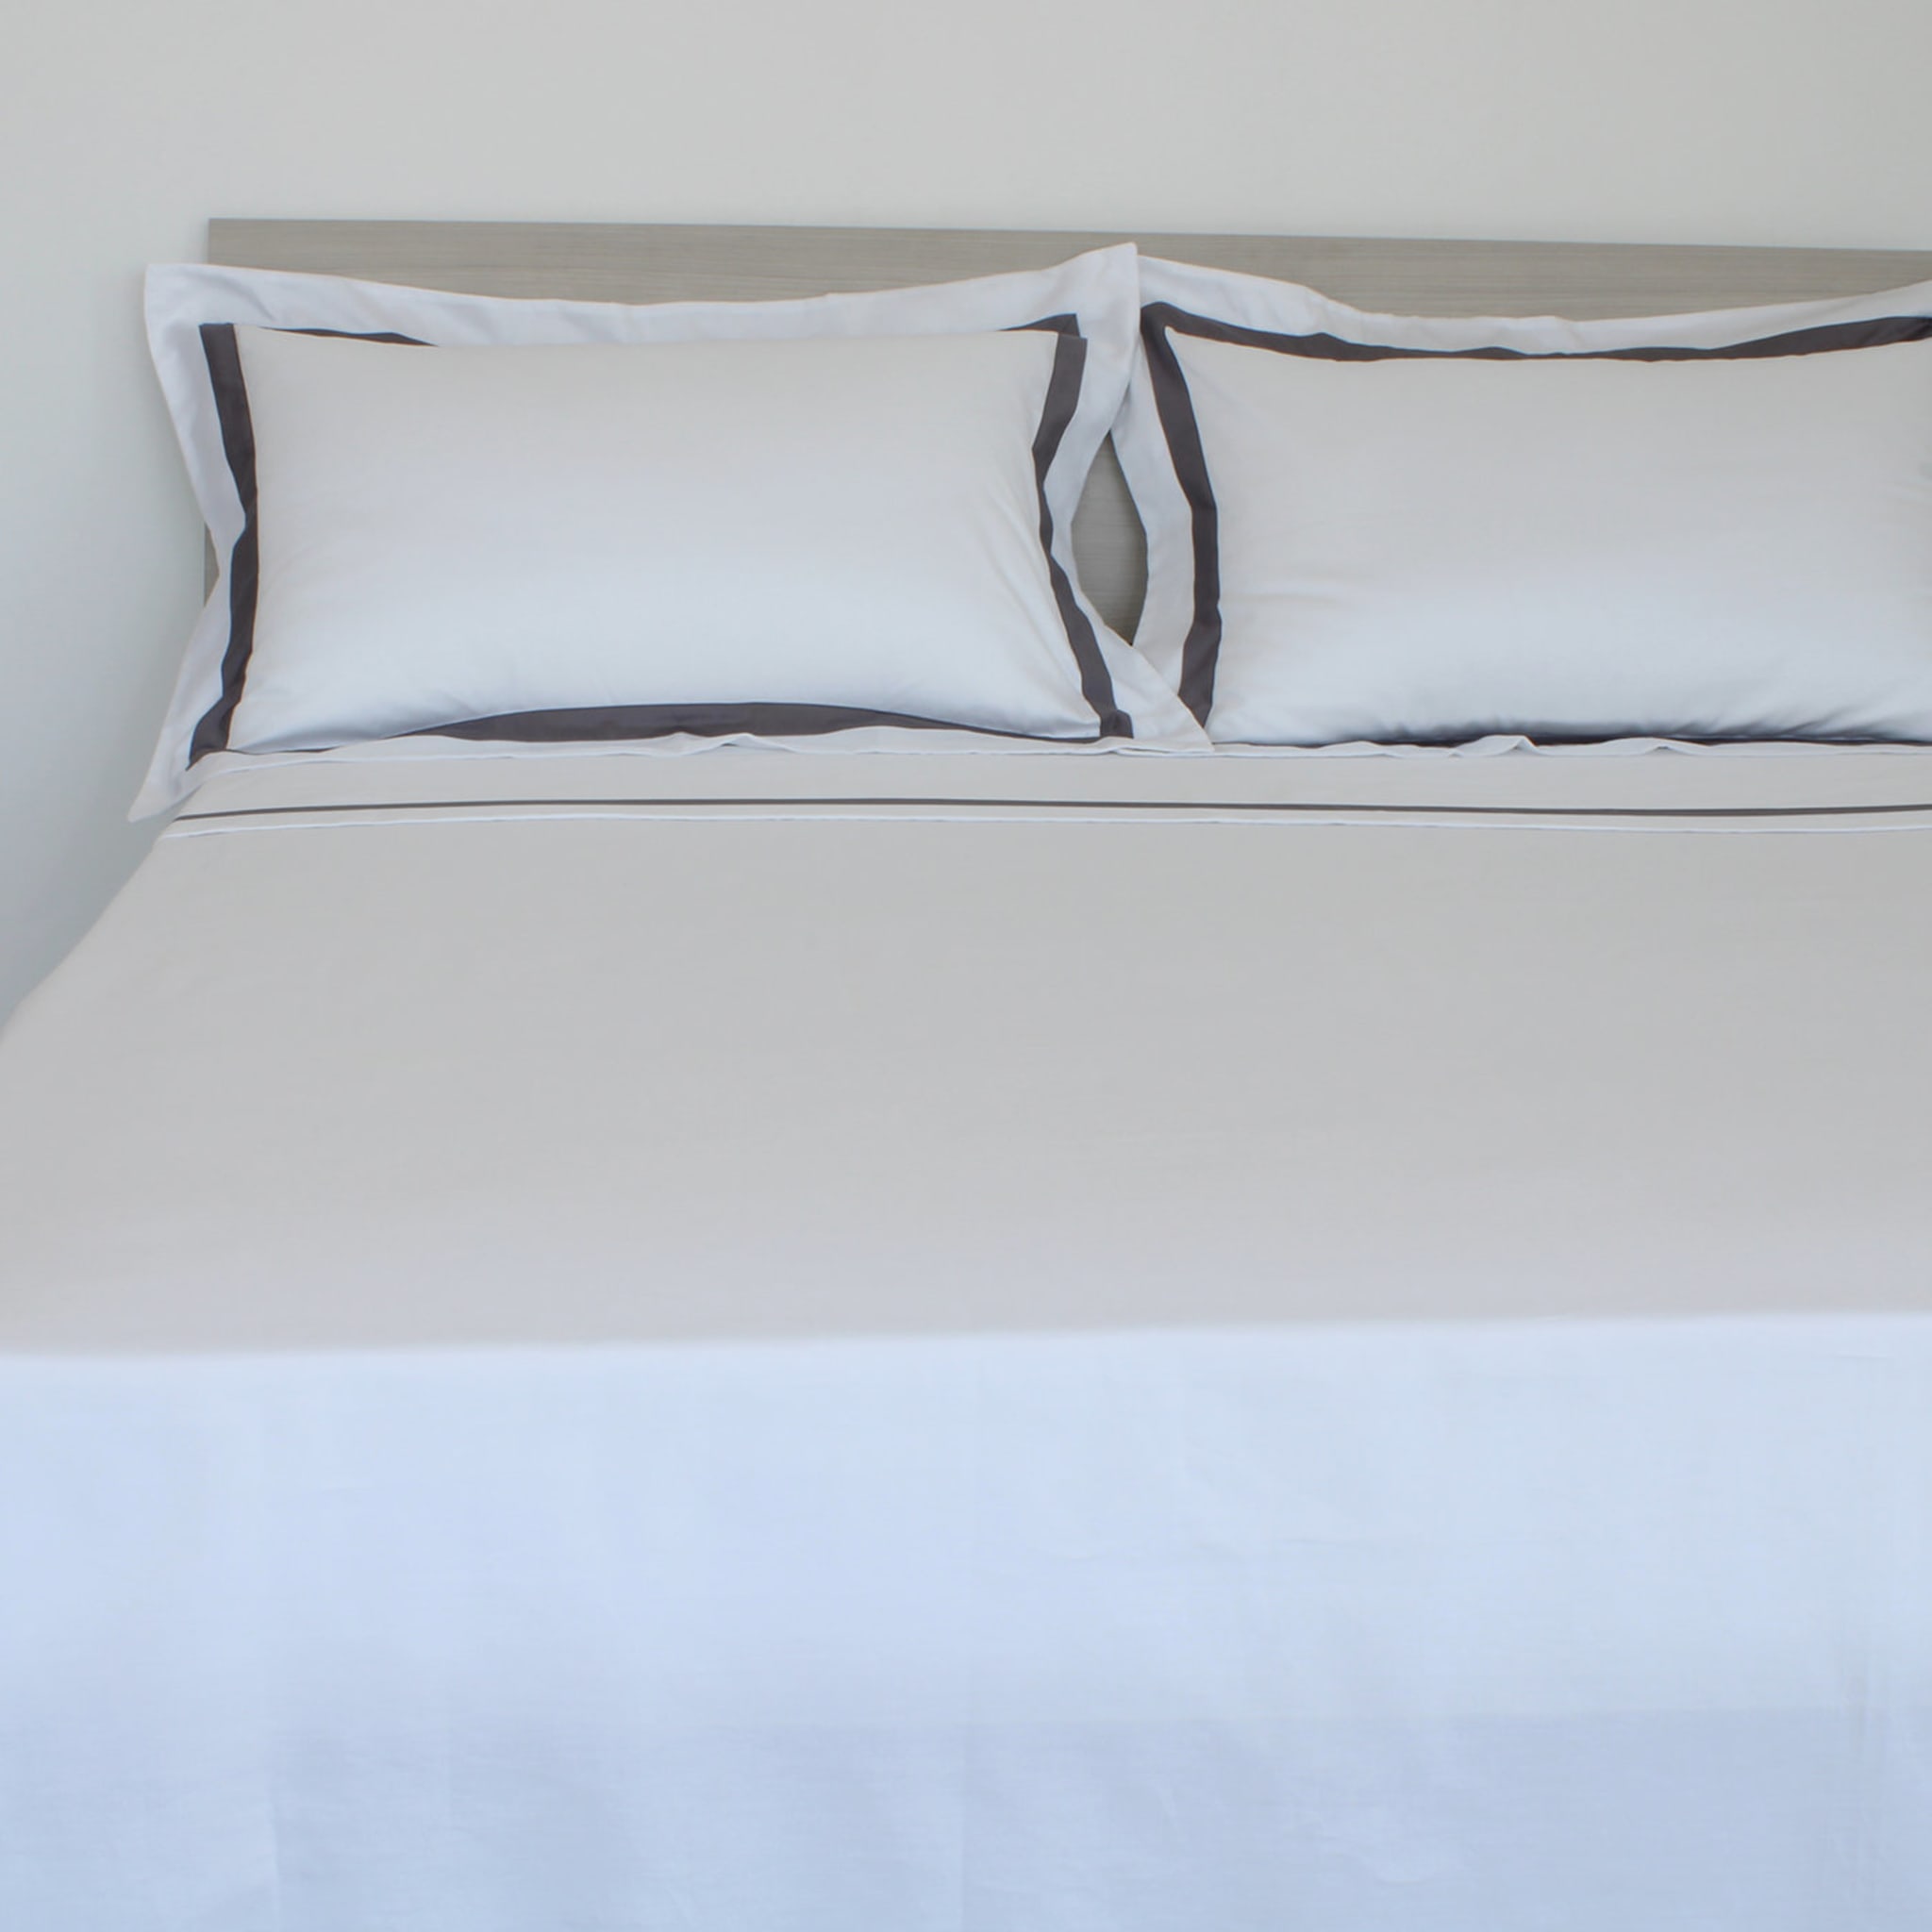 Purity King Size Sheet Set with Pillowcases - Alternative view 3